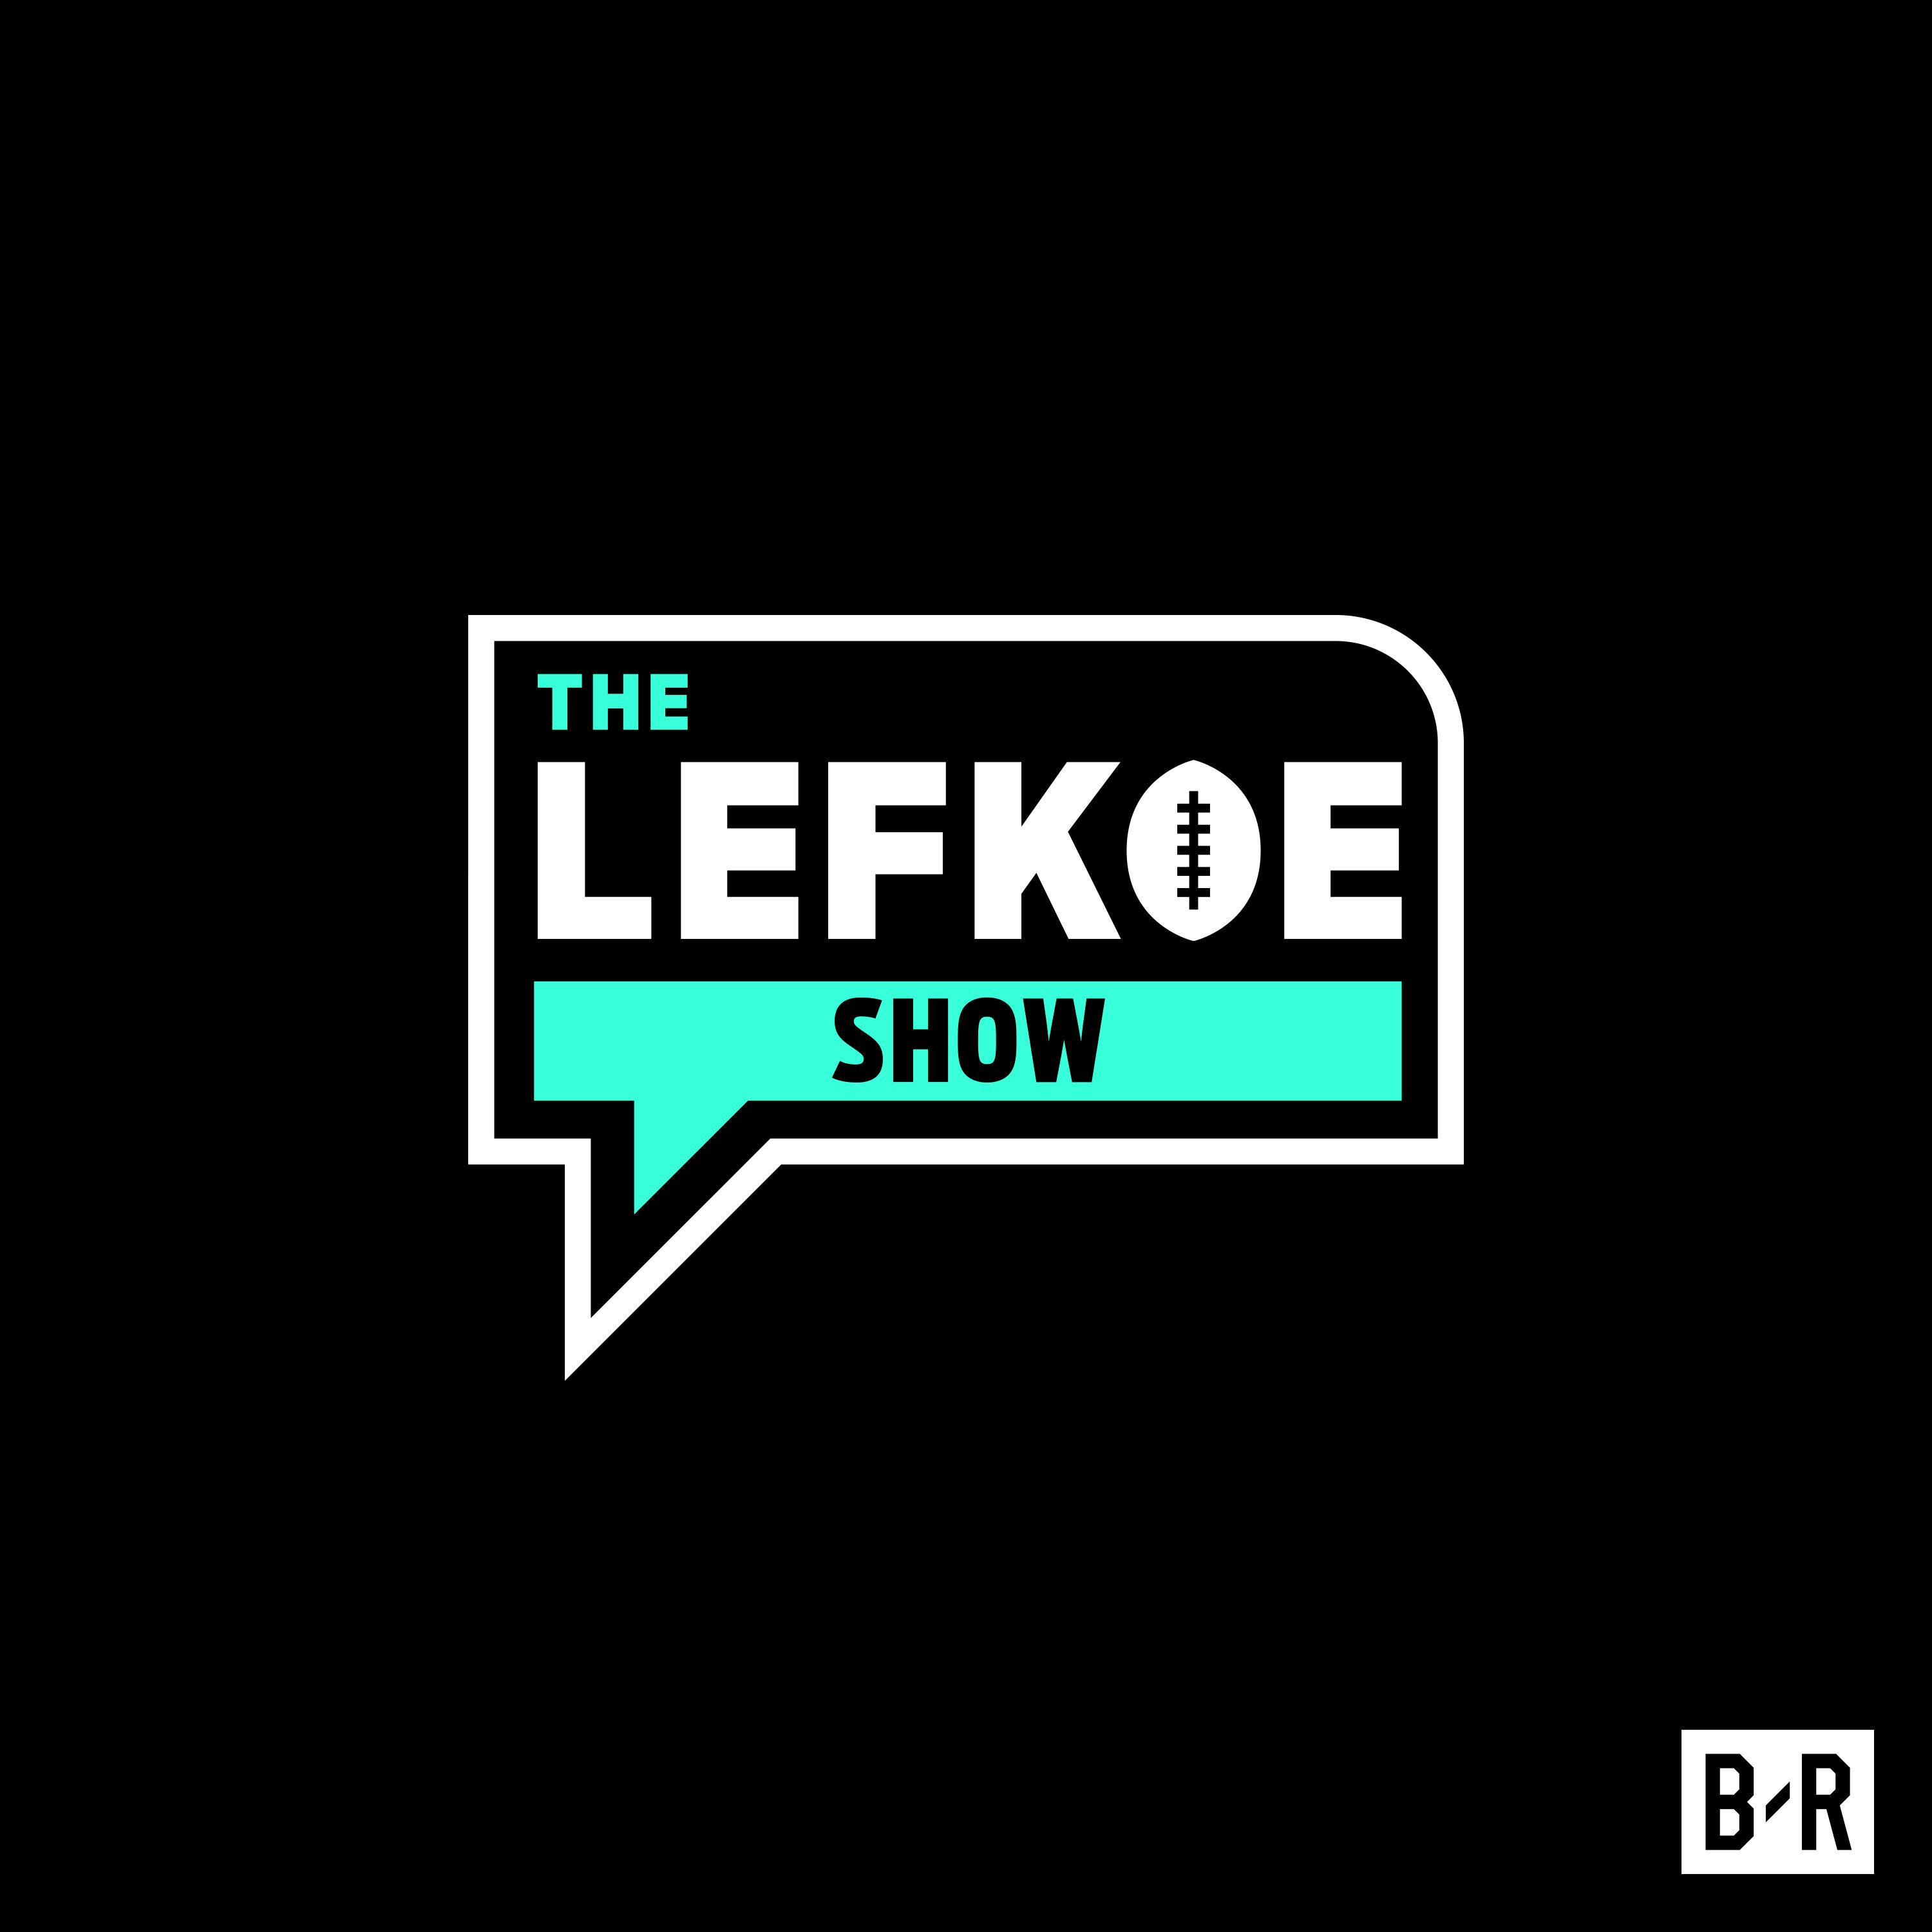 Weddings, Major Announcements, and Farewells (For Now!) | The Lefkoe Show